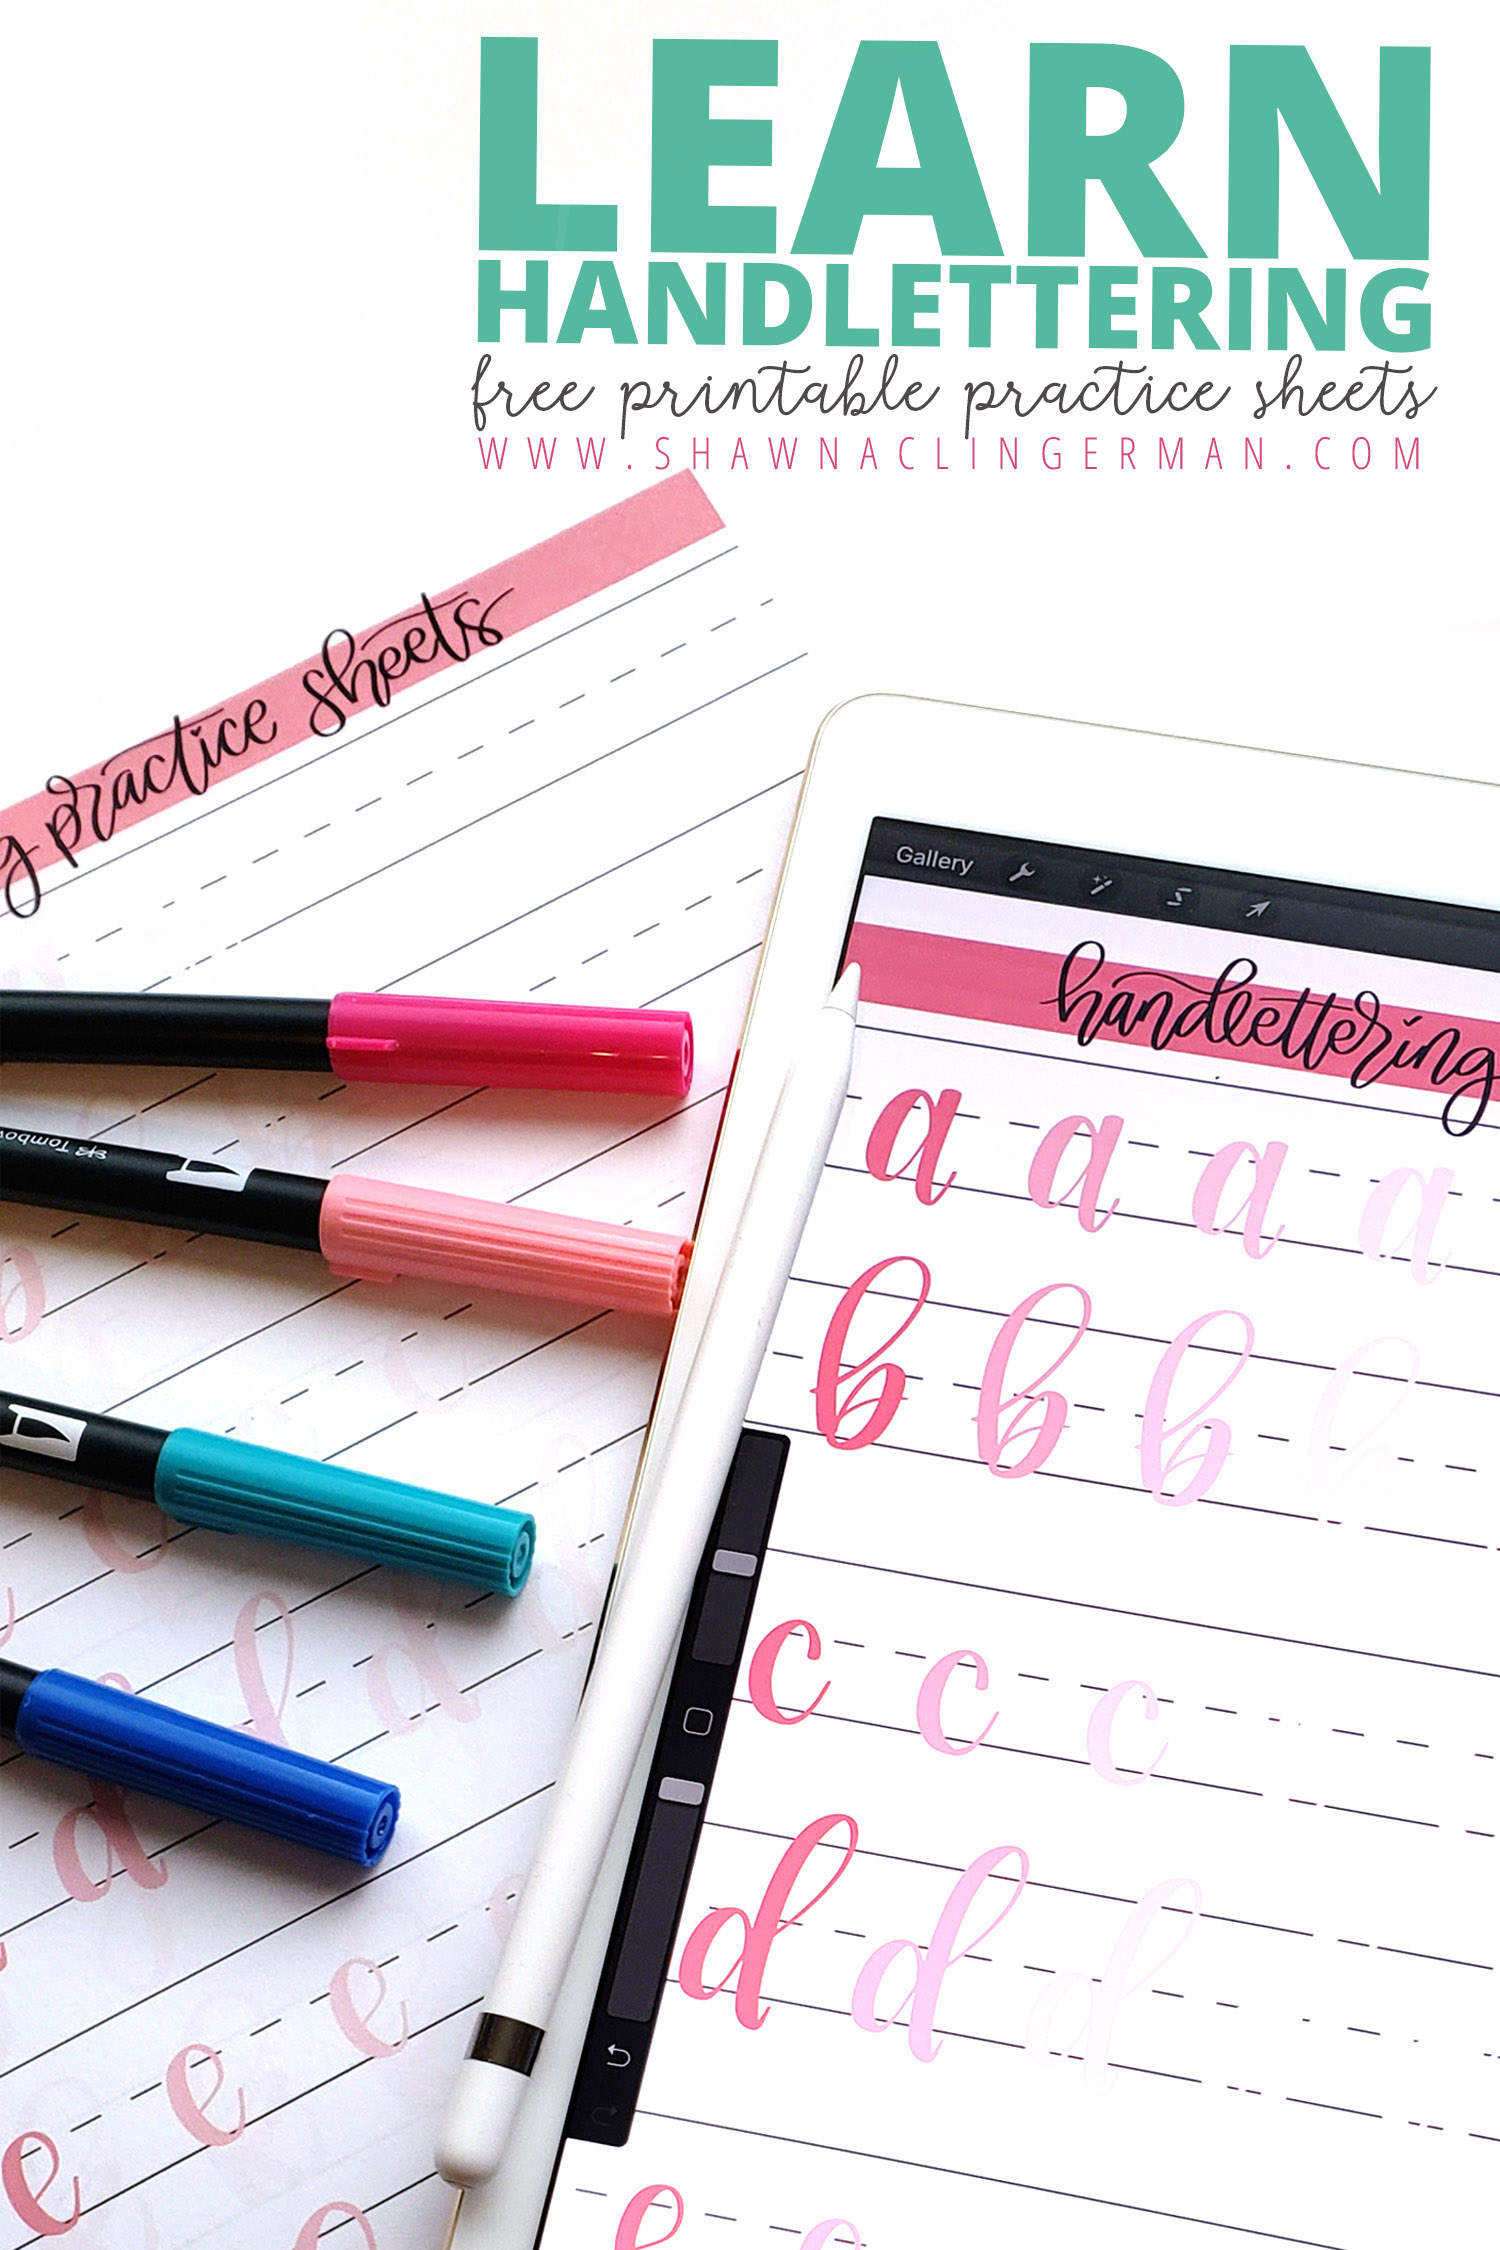 Learn Handlettering with these FREE printable practice sheets!